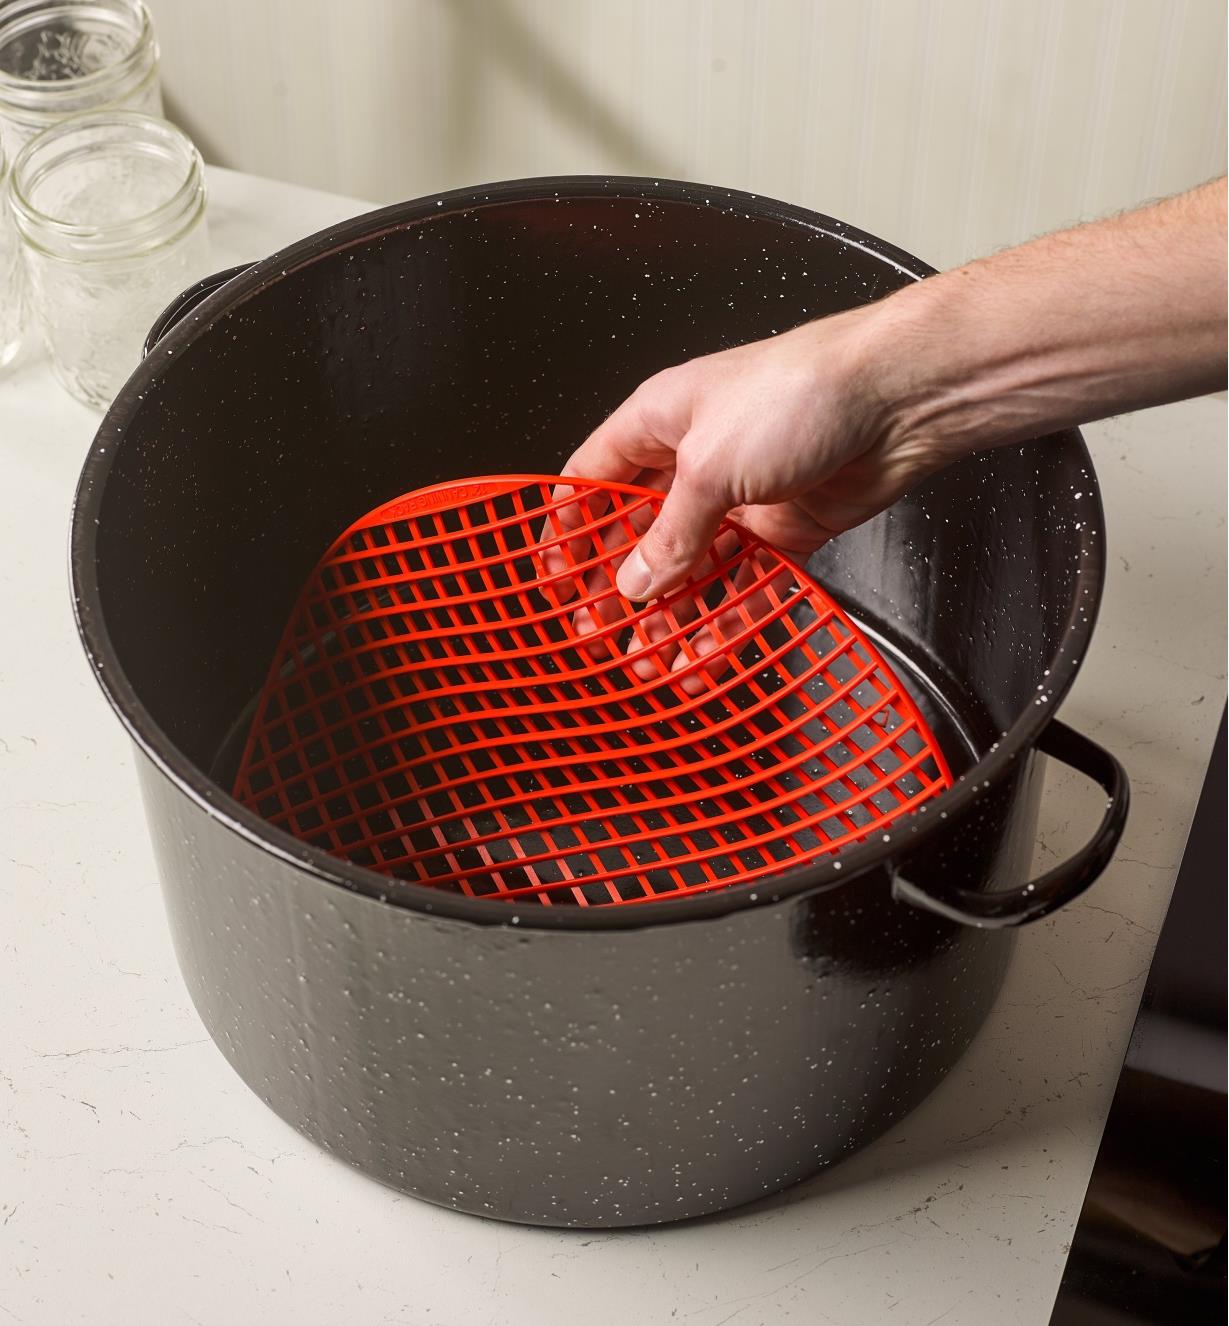 Placing a silicone canning mat into the bottom of a large pot